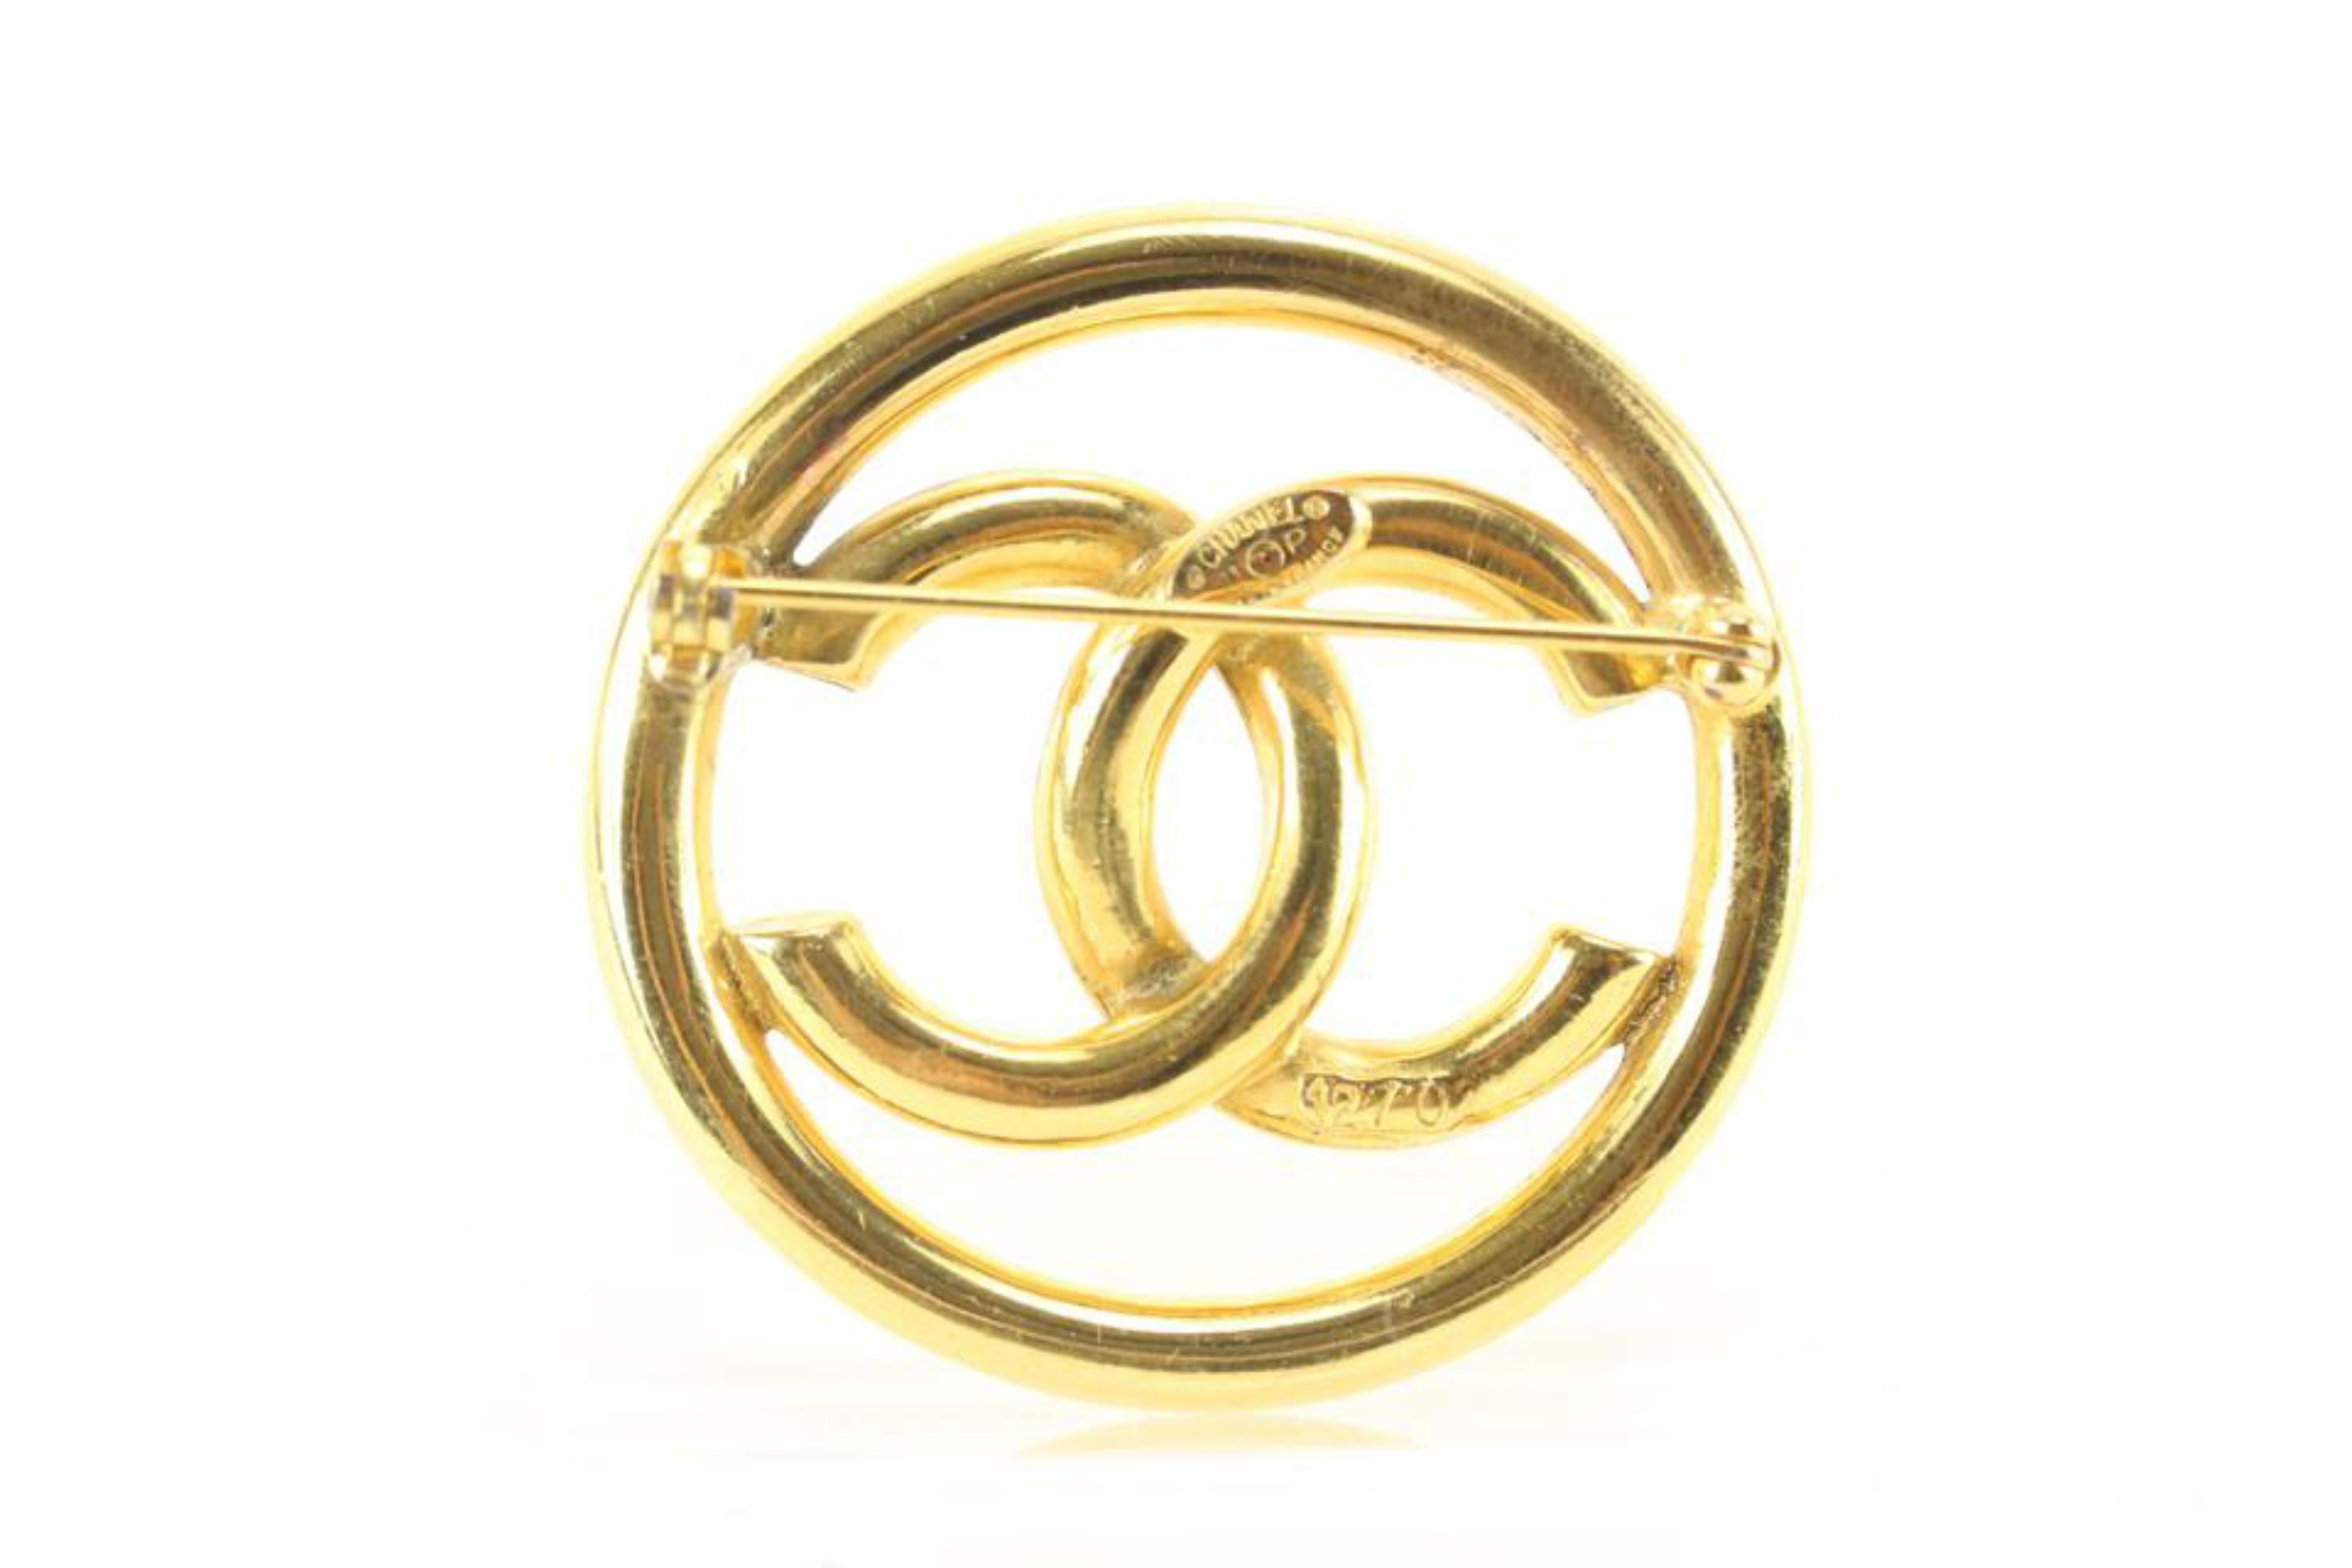 Chanel 93P 24k Gold Plate CC Logo Circle Brooch Pin 31ck824s For Sale 6